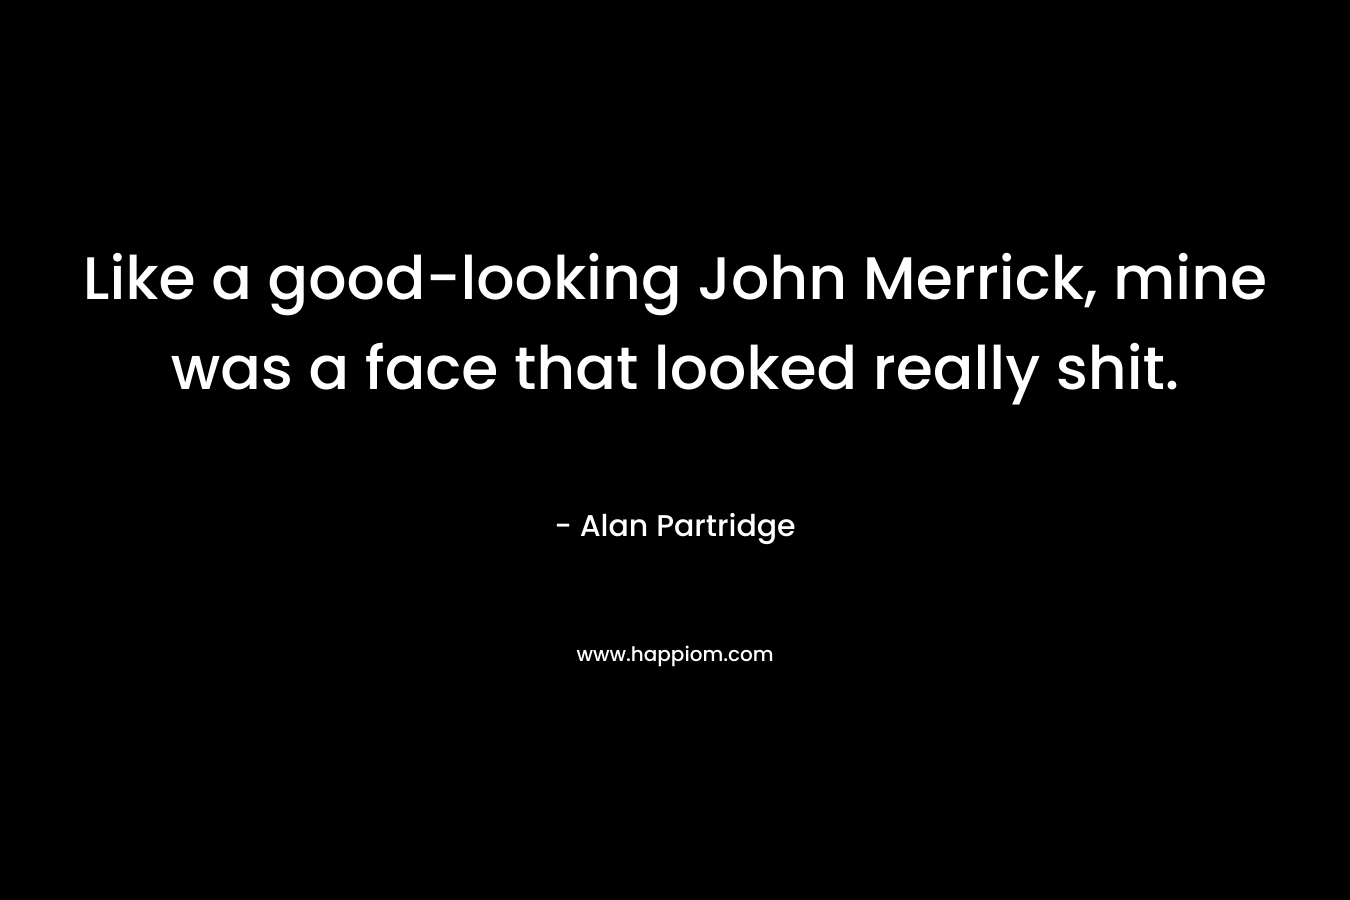 Like a good-looking John Merrick, mine was a face that looked really shit. – Alan Partridge